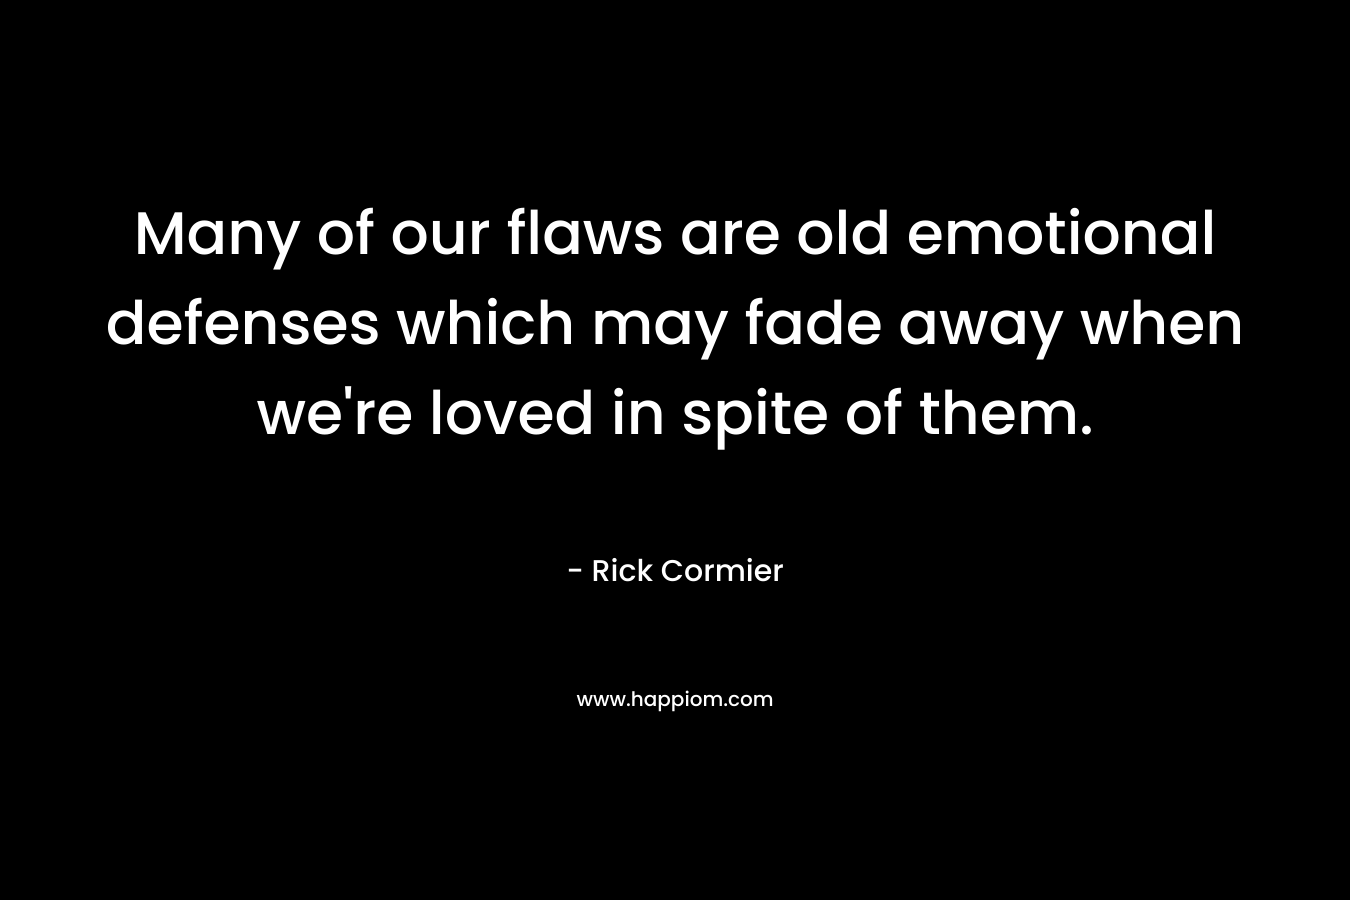 Many of our flaws are old emotional defenses which may fade away when we’re loved in spite of them. – Rick Cormier